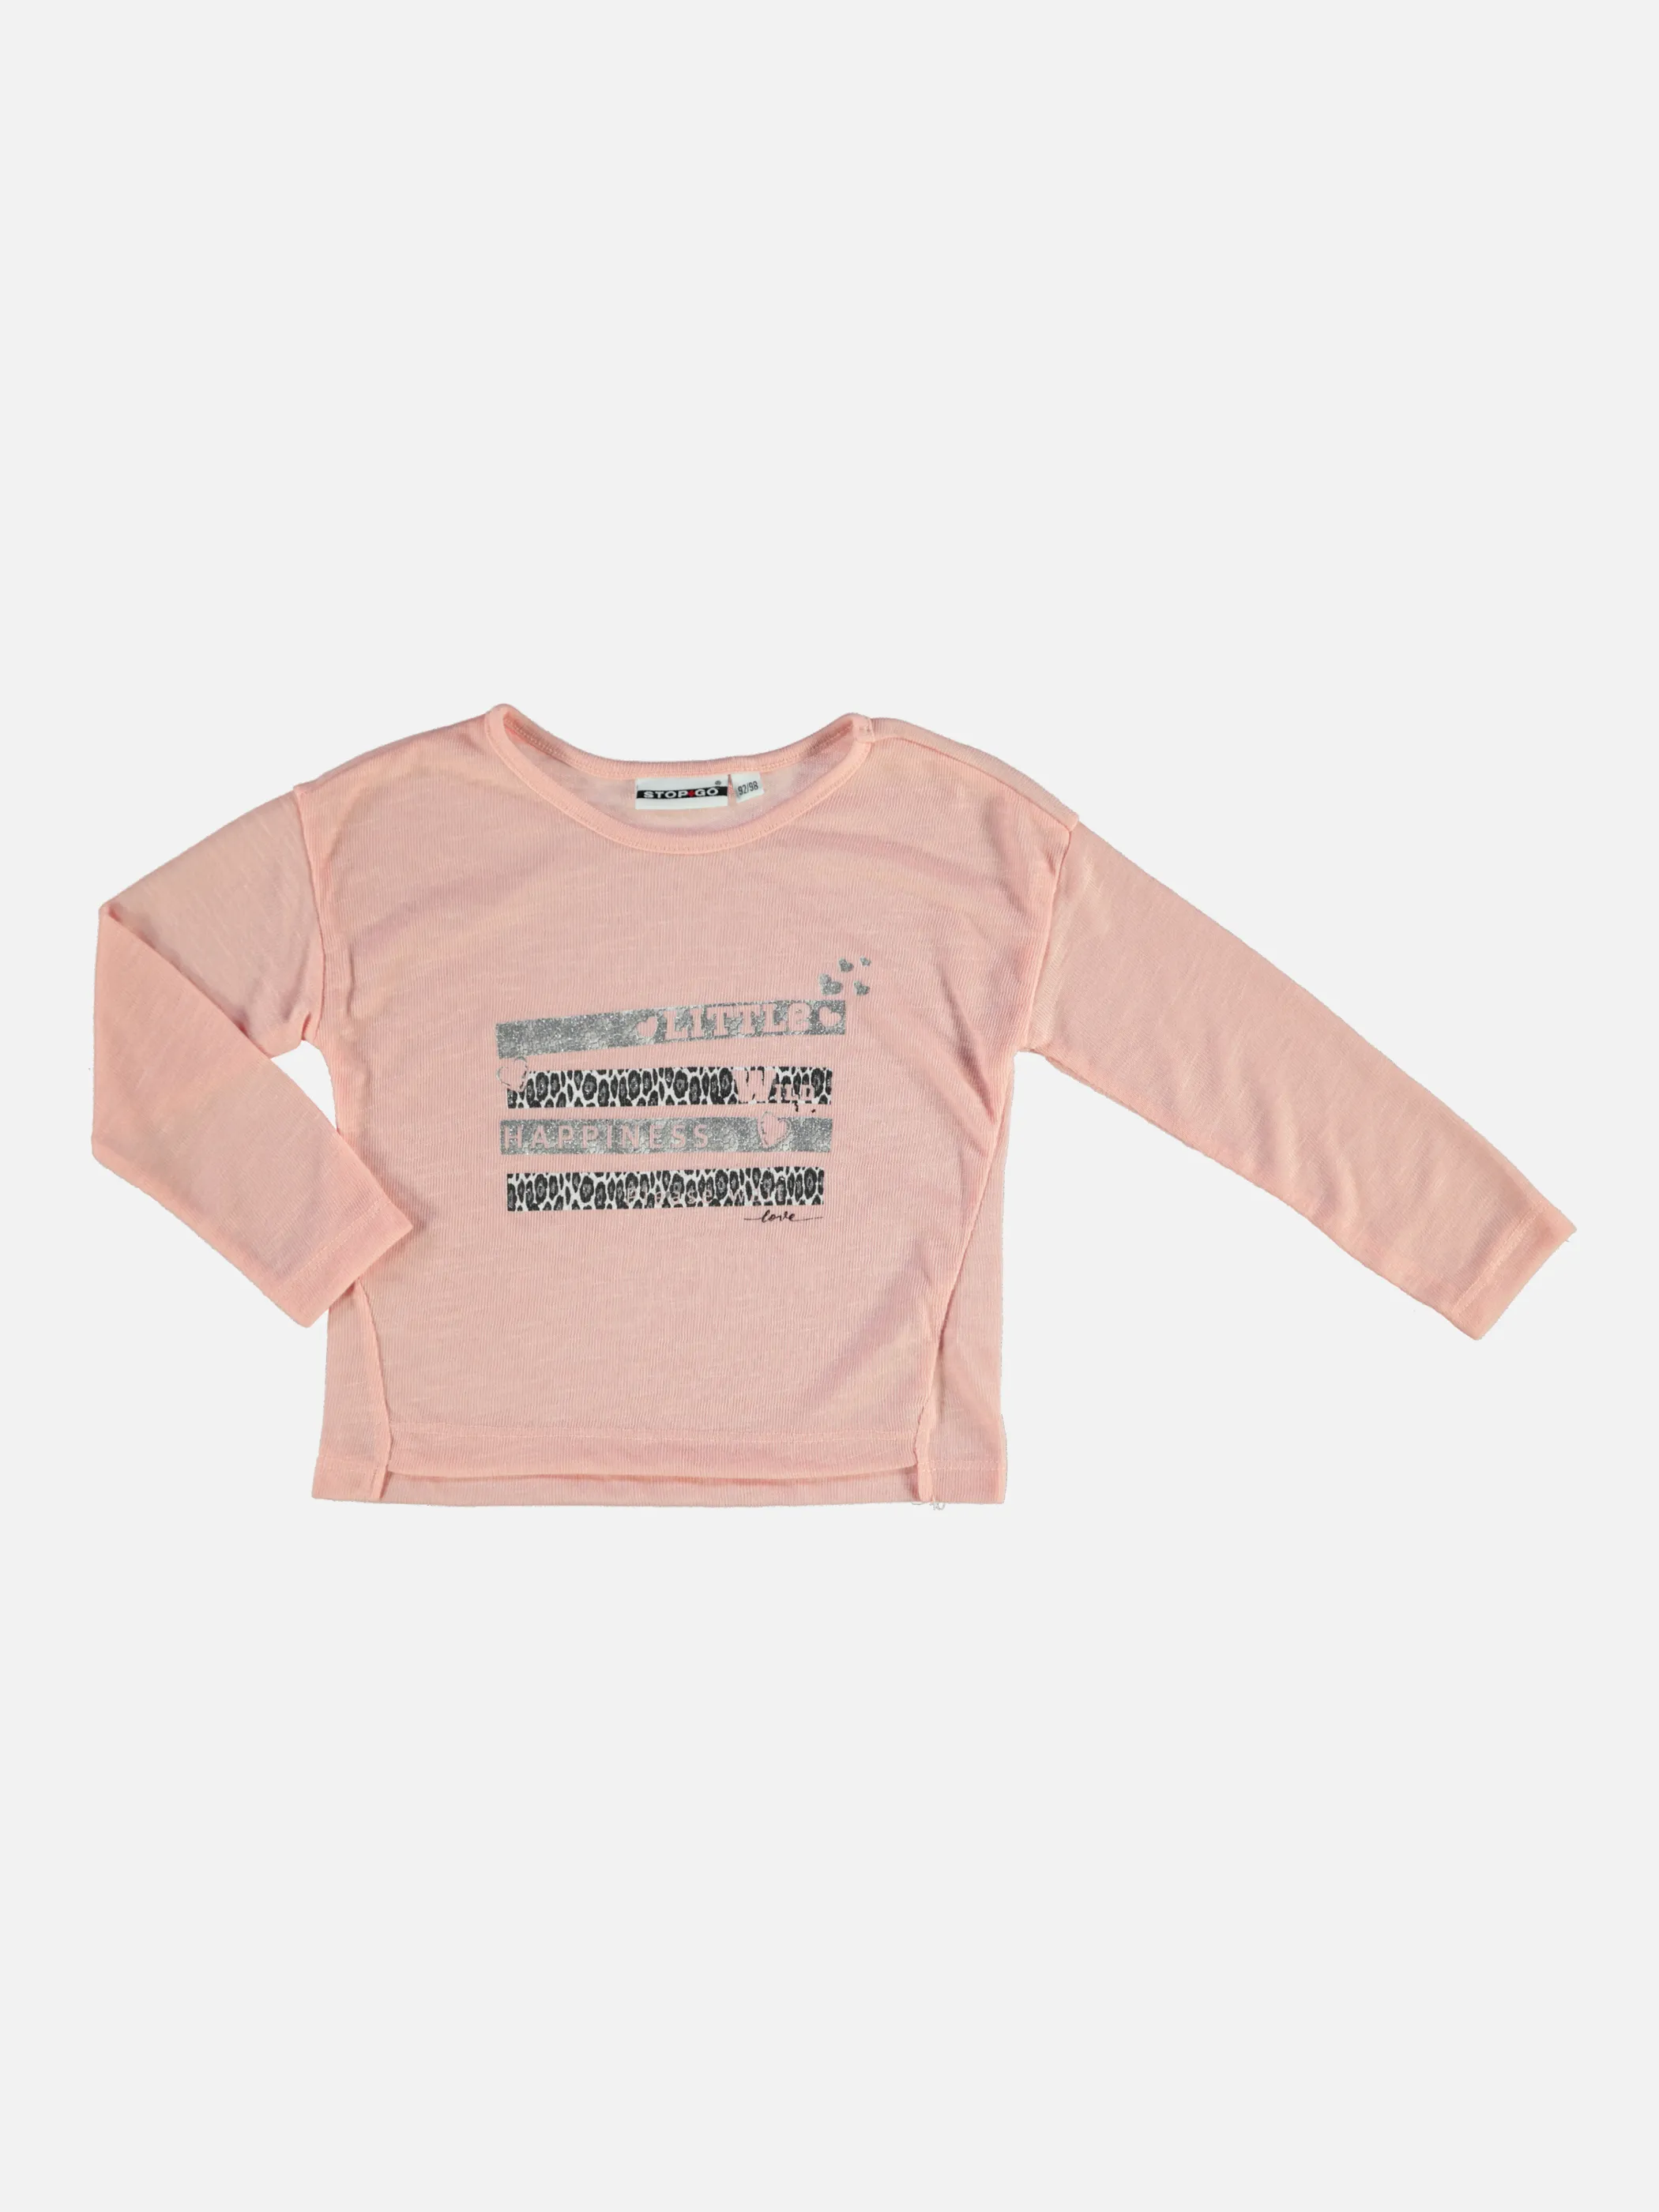 Stop + Go MG Pullover pink mit Wording Pink 846085 PINK 1